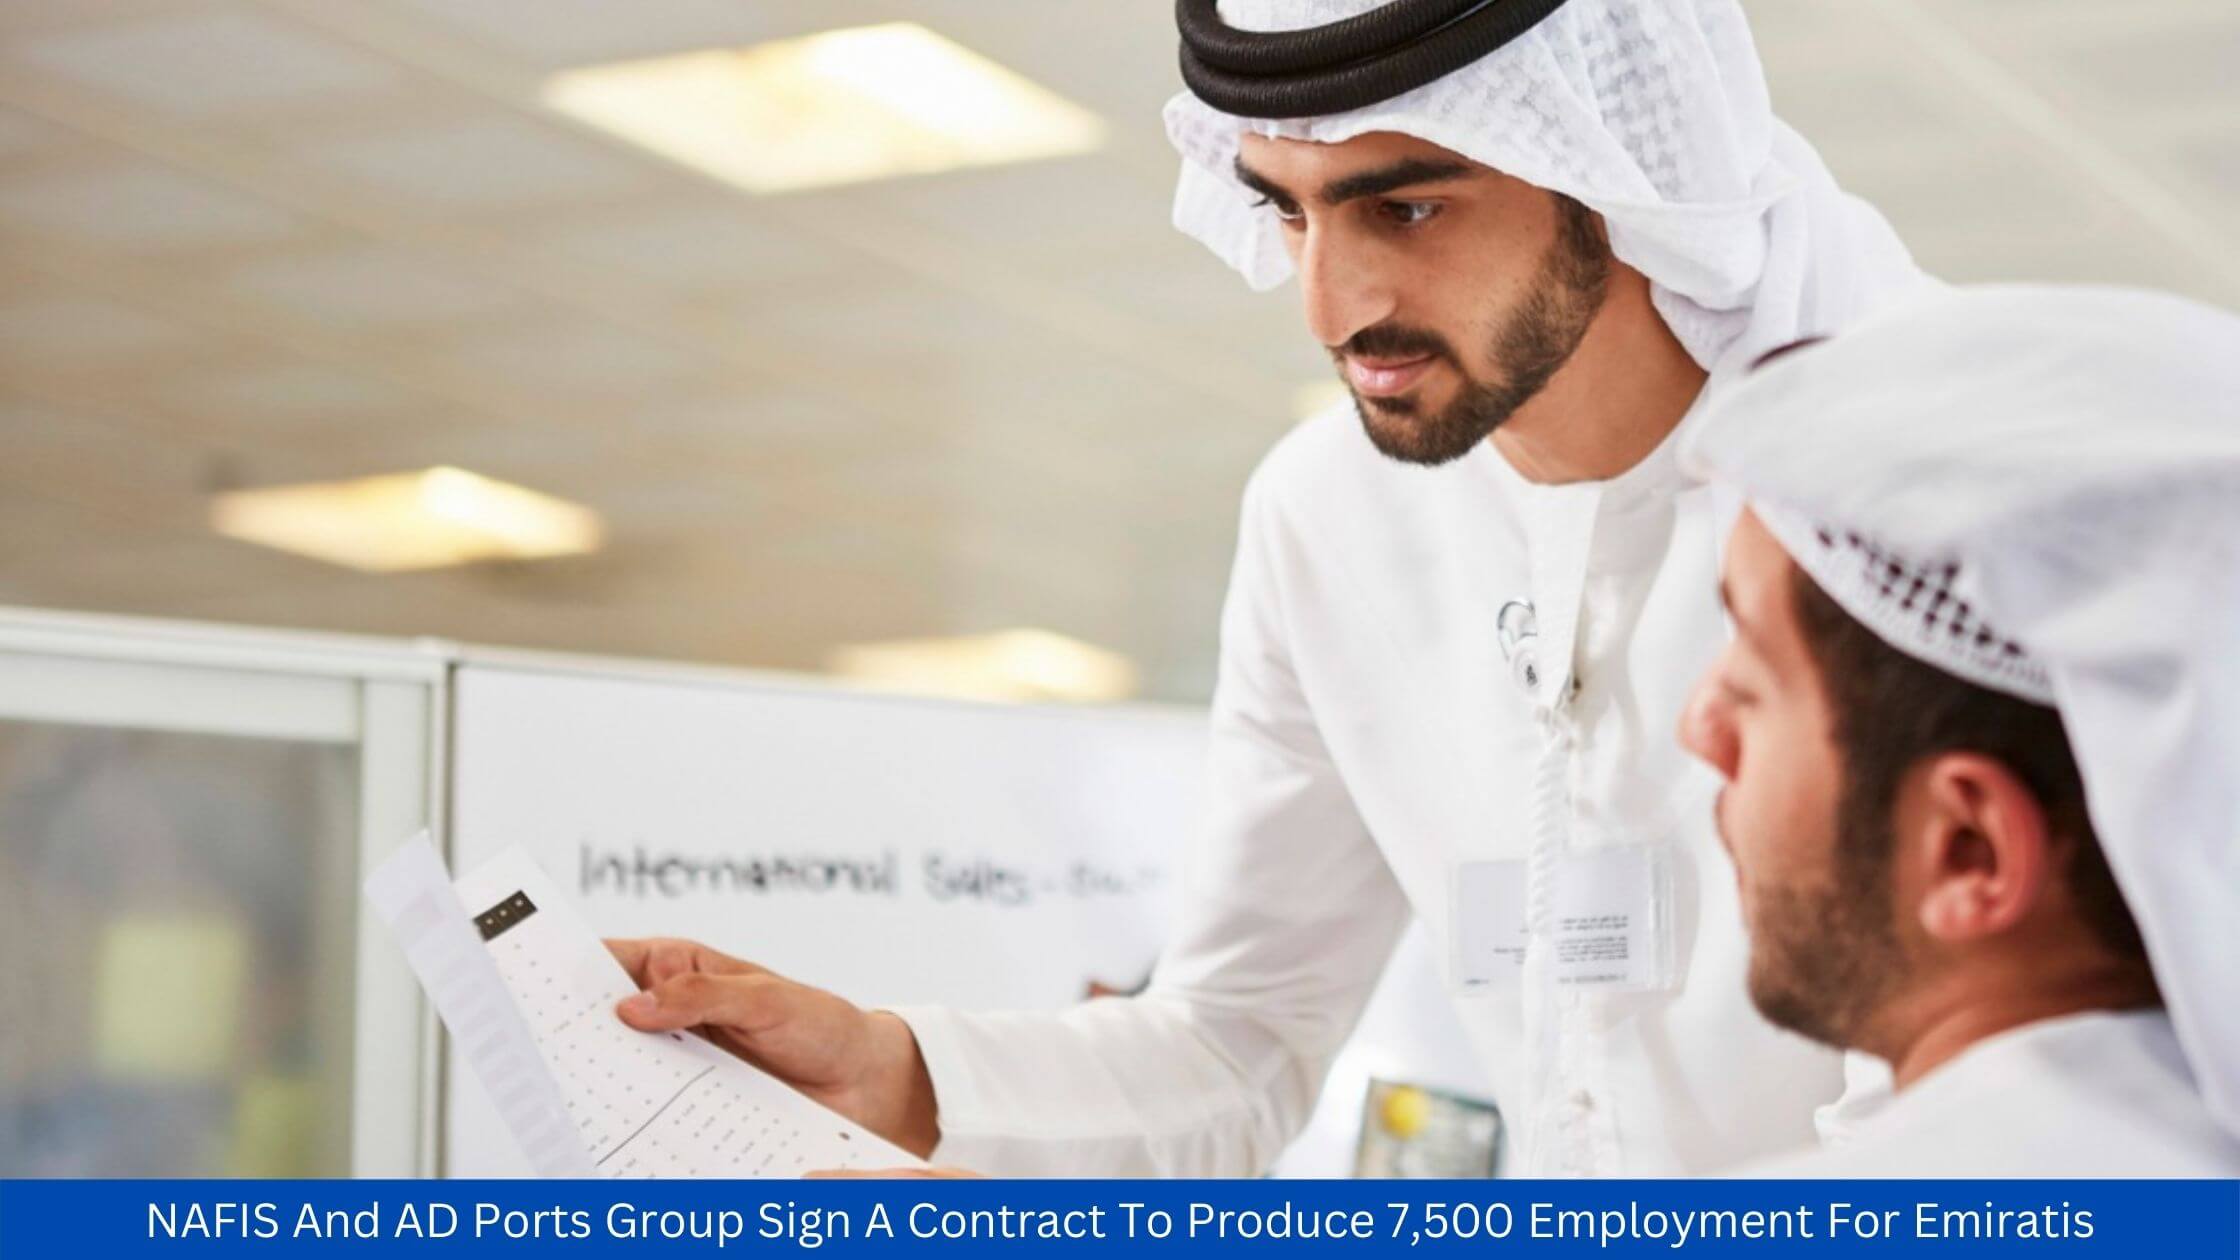 NAFIS And AD Ports Group Sign A Contract To Produce 7,500 Employment For Emiratis